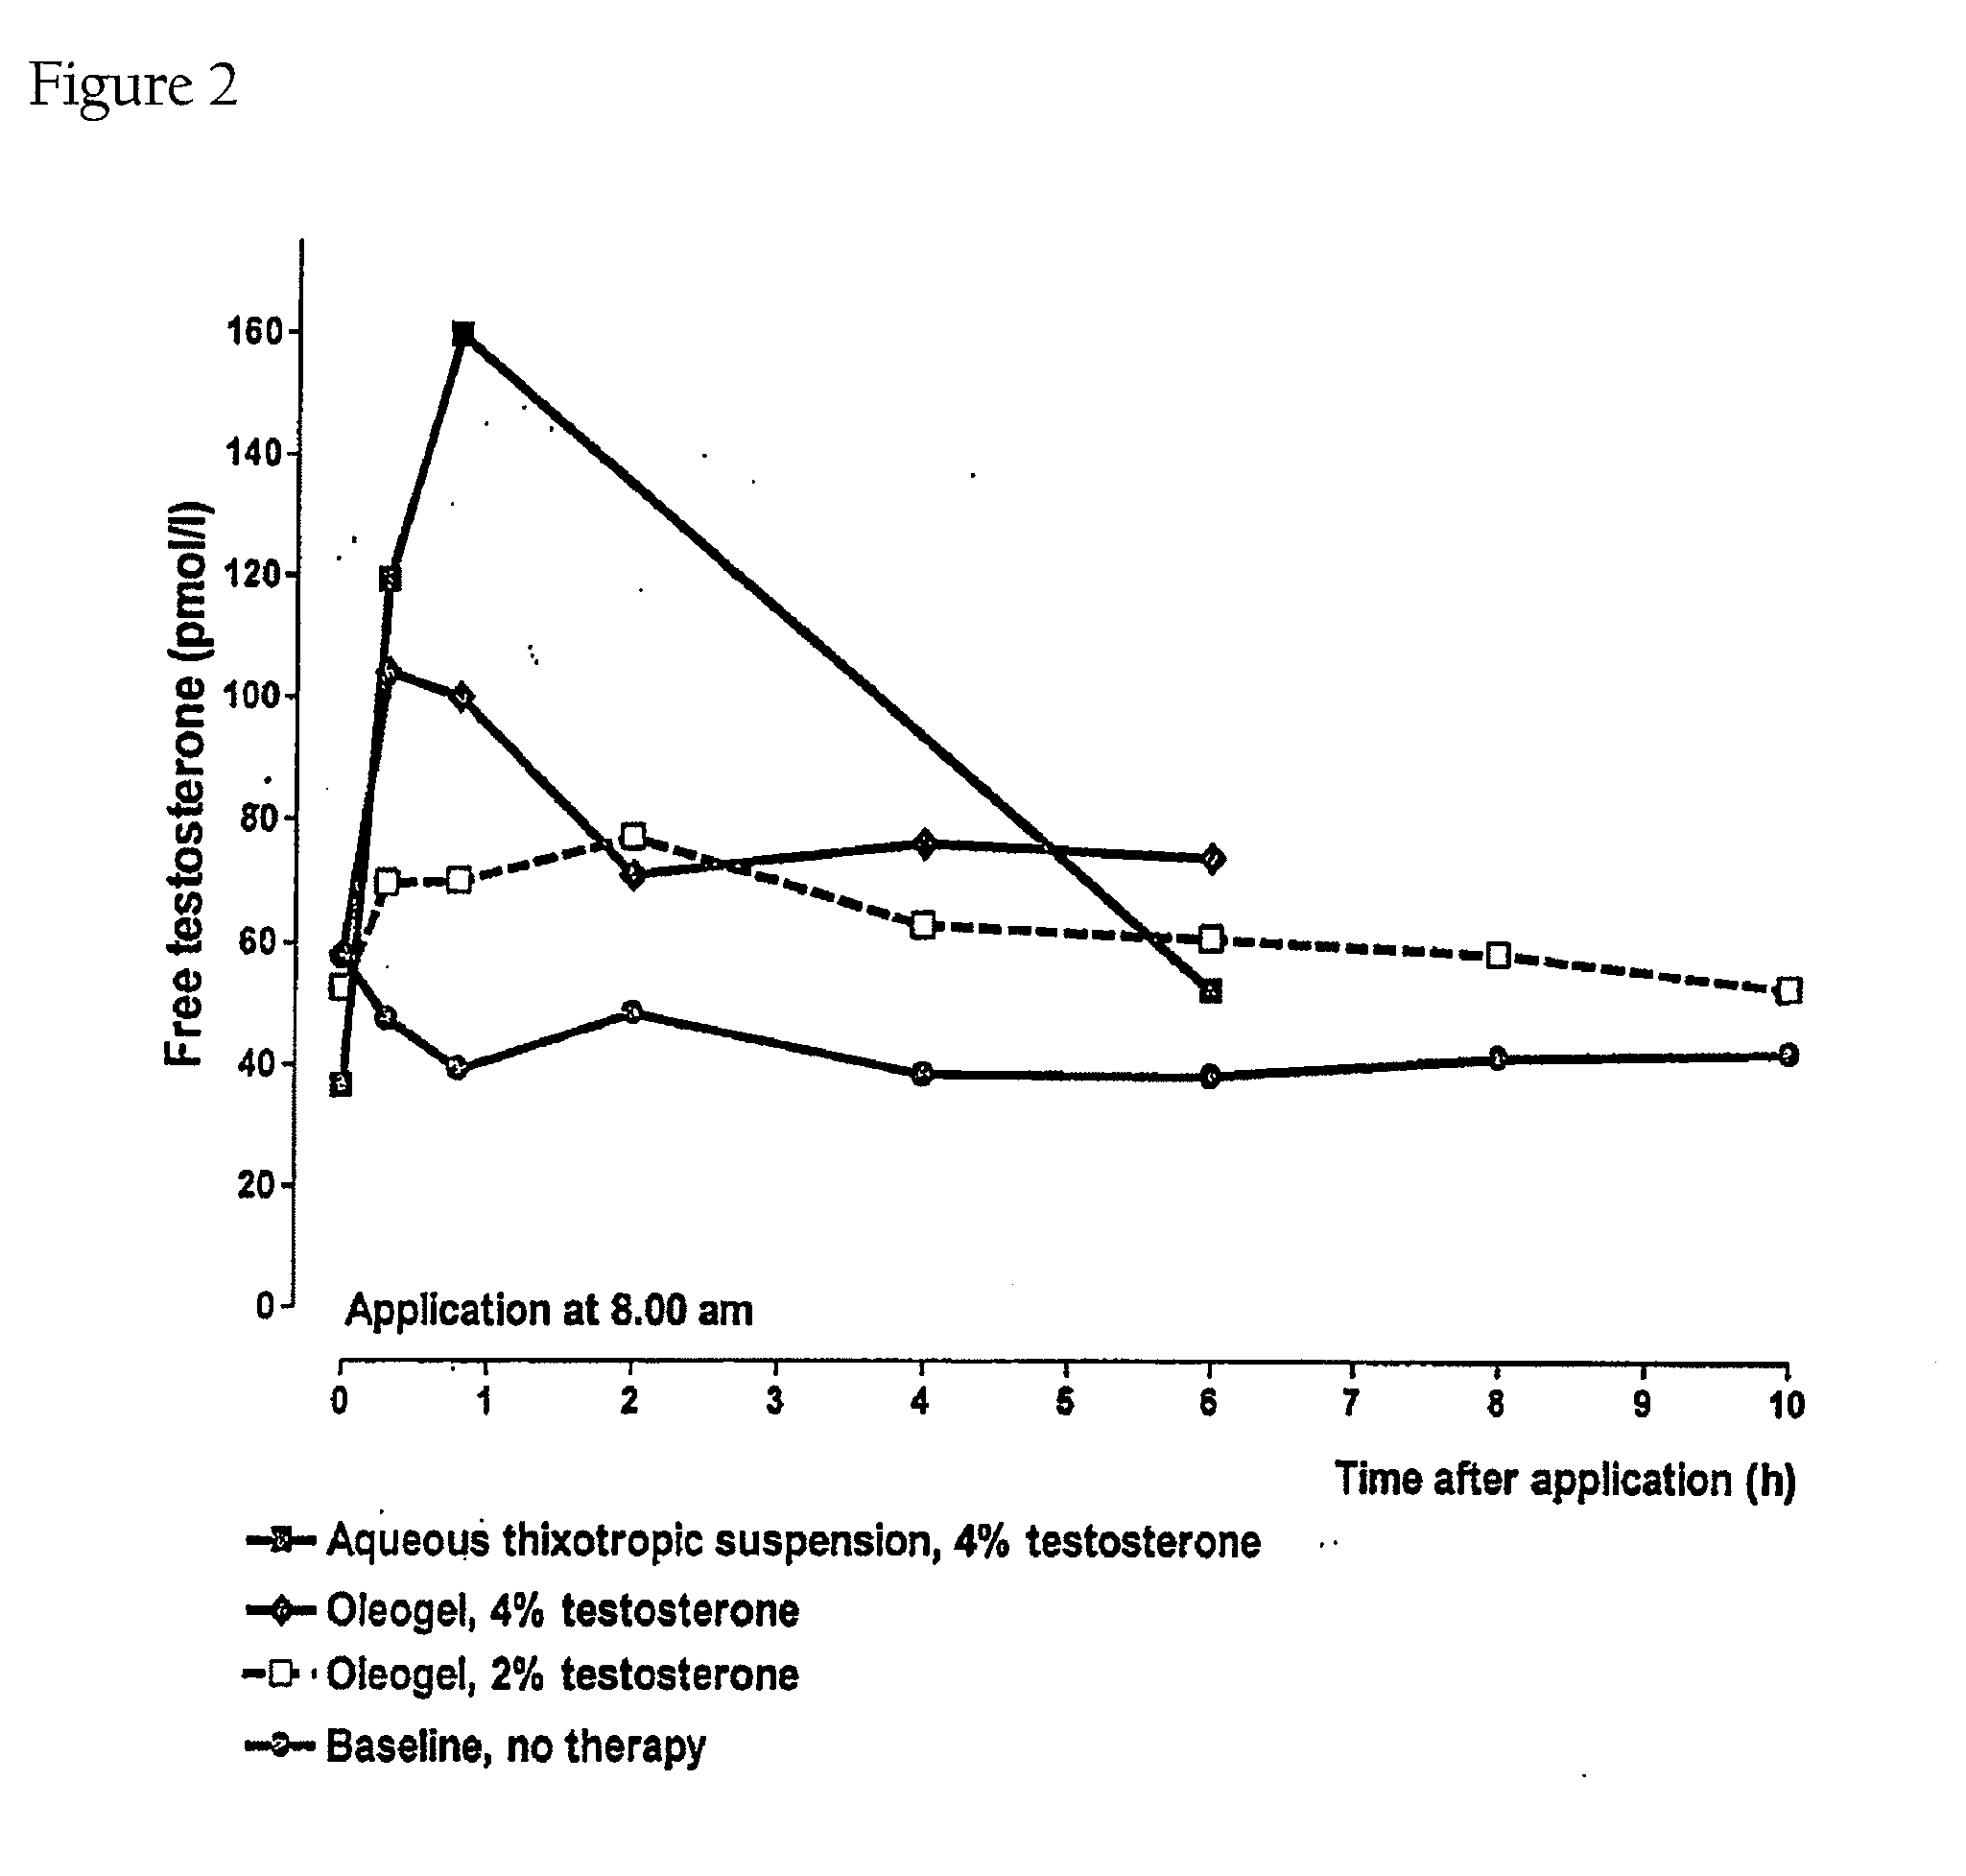 Controlled Release Delivery System for Nasal Applications and Method of Treatment